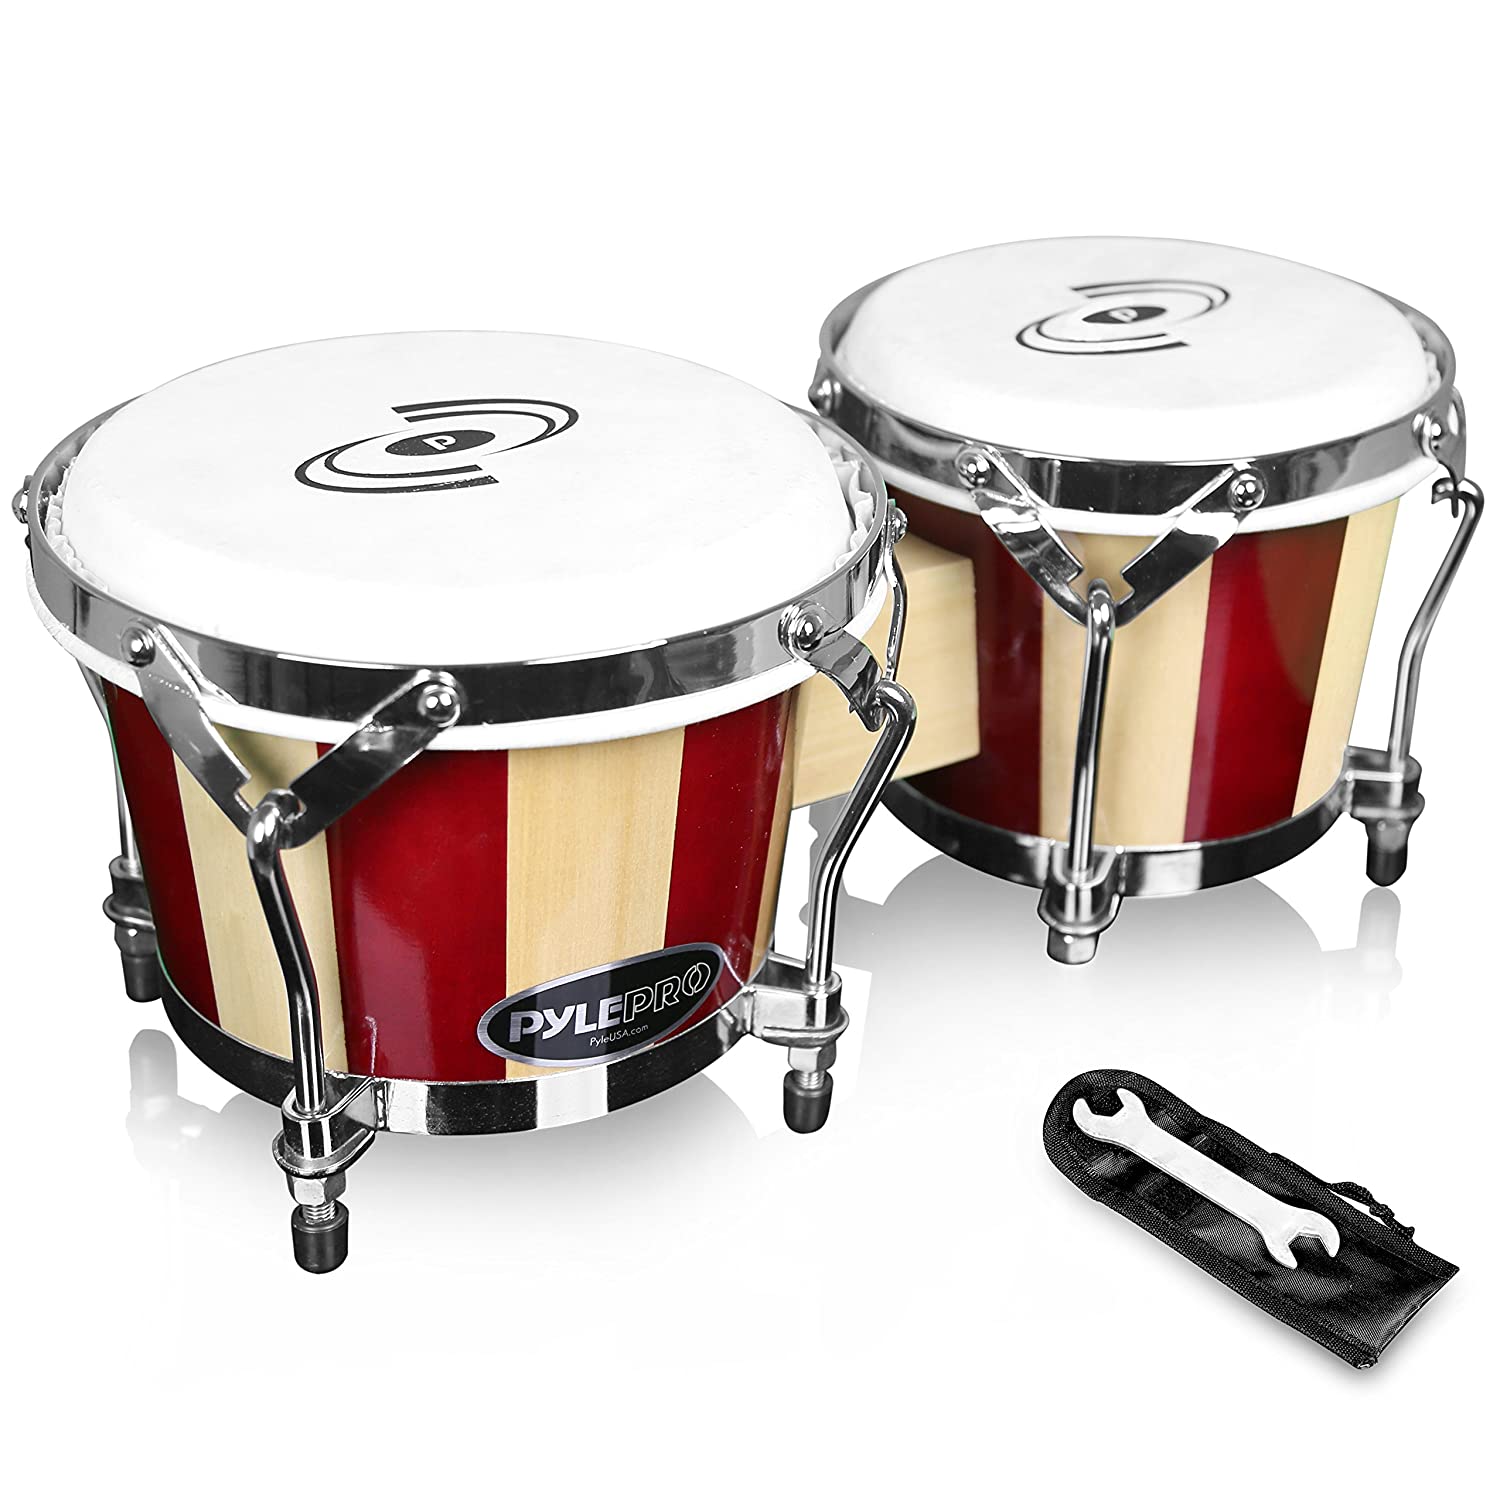 9 Best Bongo Drums for Kids 2022 - Reviews & Buying Guide 9